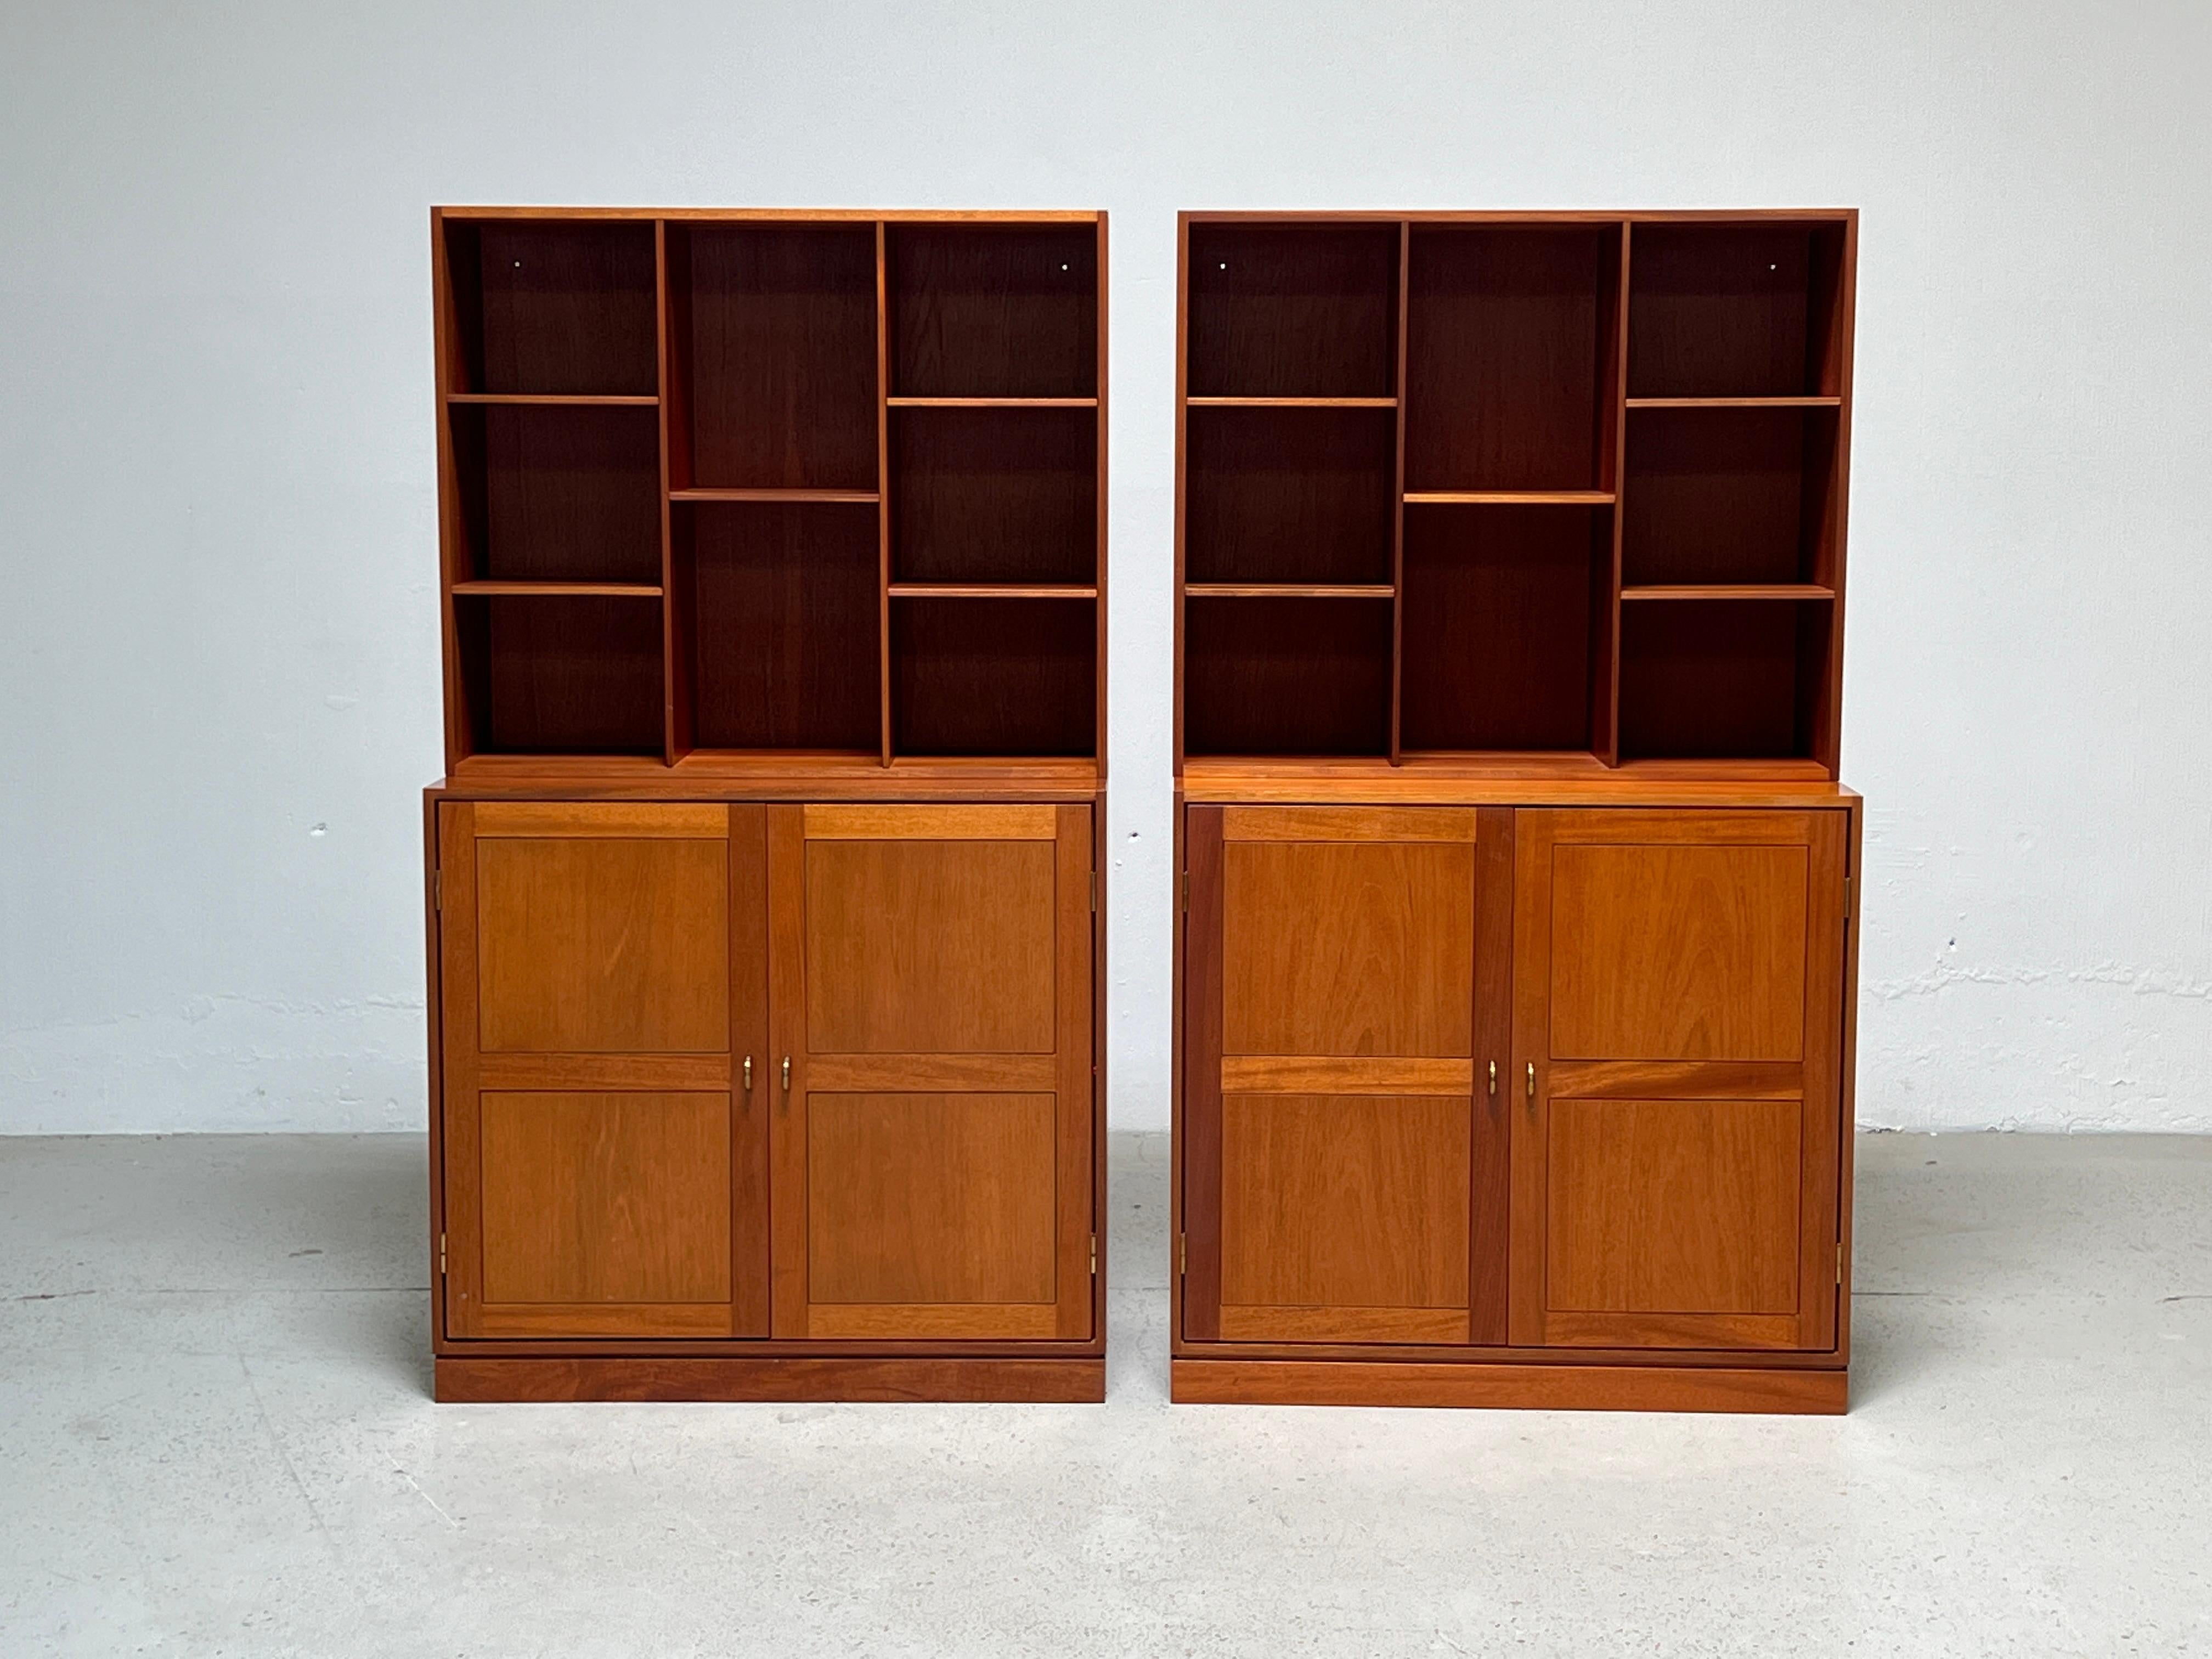 A four piece teak wall unit with brass hardware. Bookshelves with adjustable shelving. Designed by Christian Hvidt for Soborg.